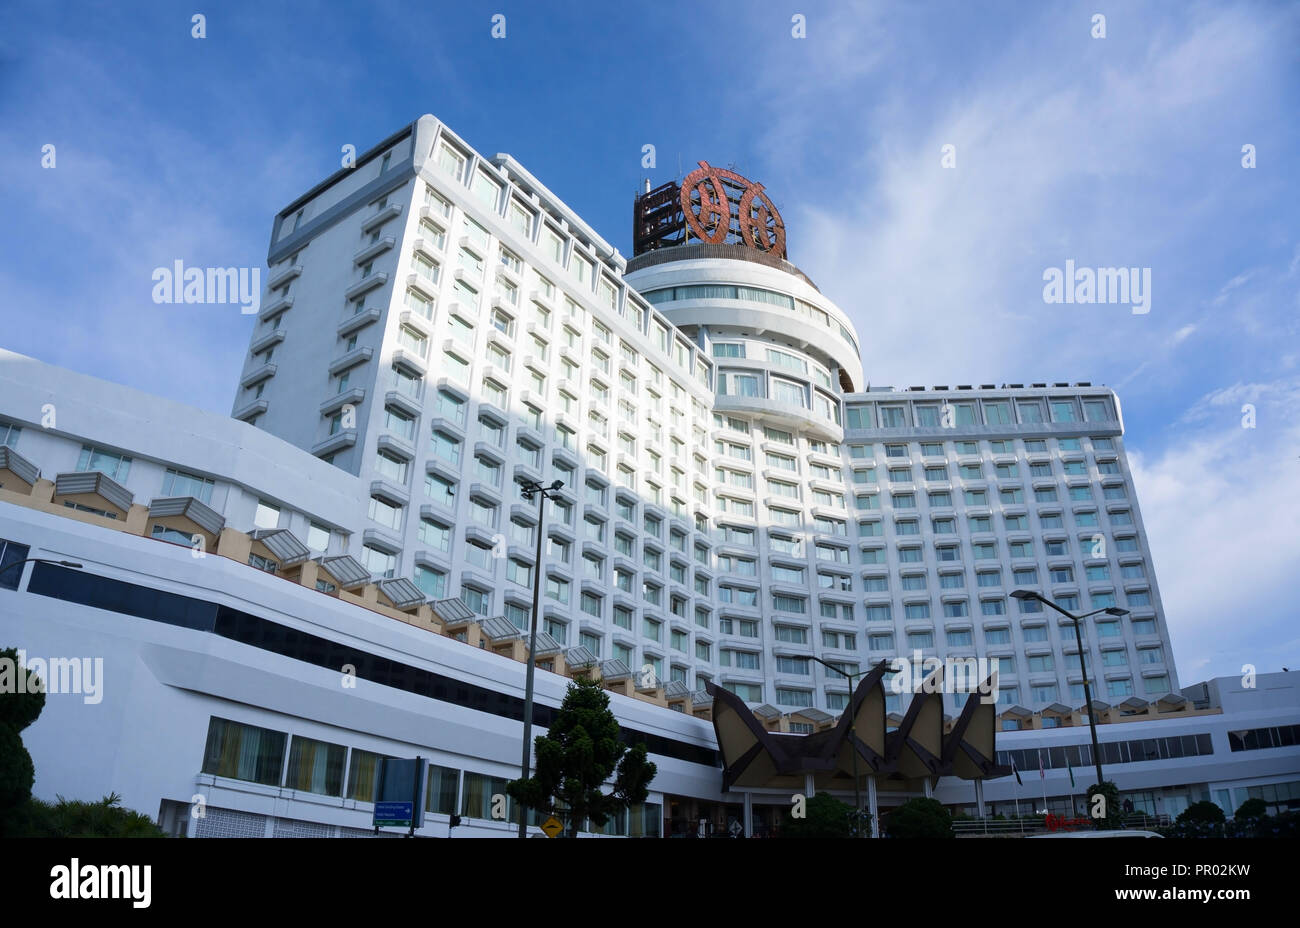 Highland hotel genting THE 10